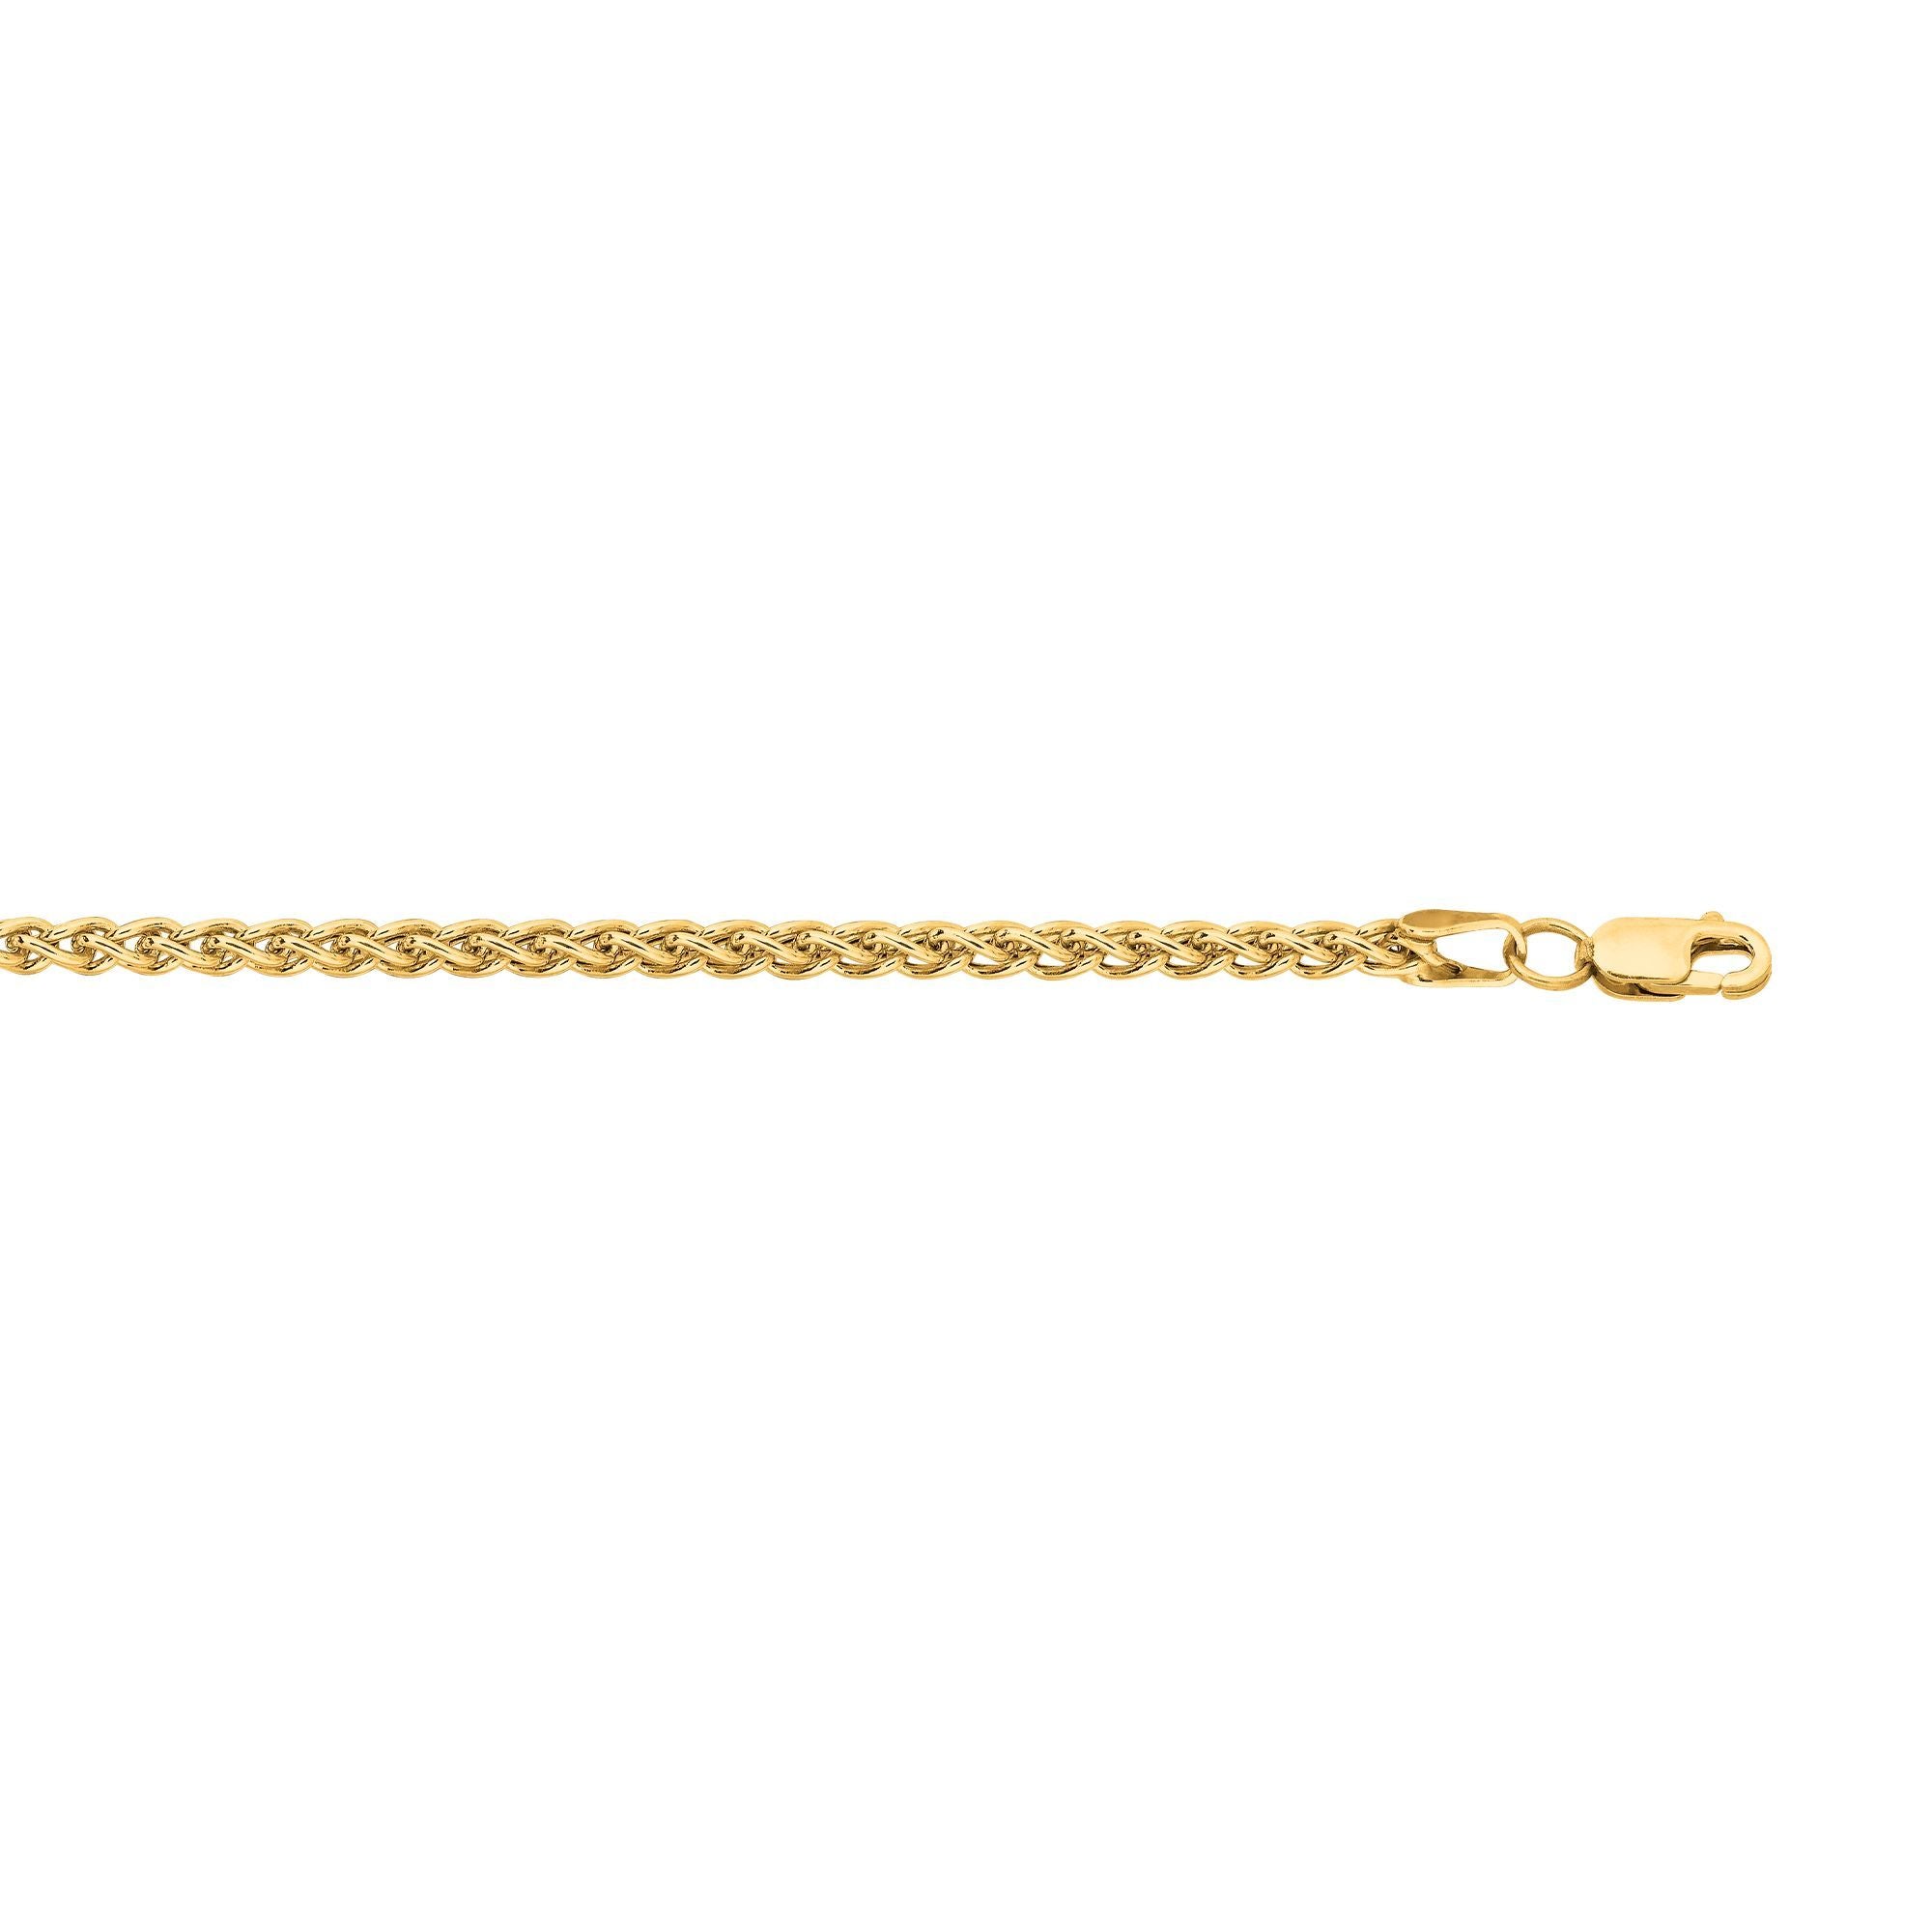 Shiny Lite Weight Round Wheat Chain with Lobster Clasp - wingroupjewelry